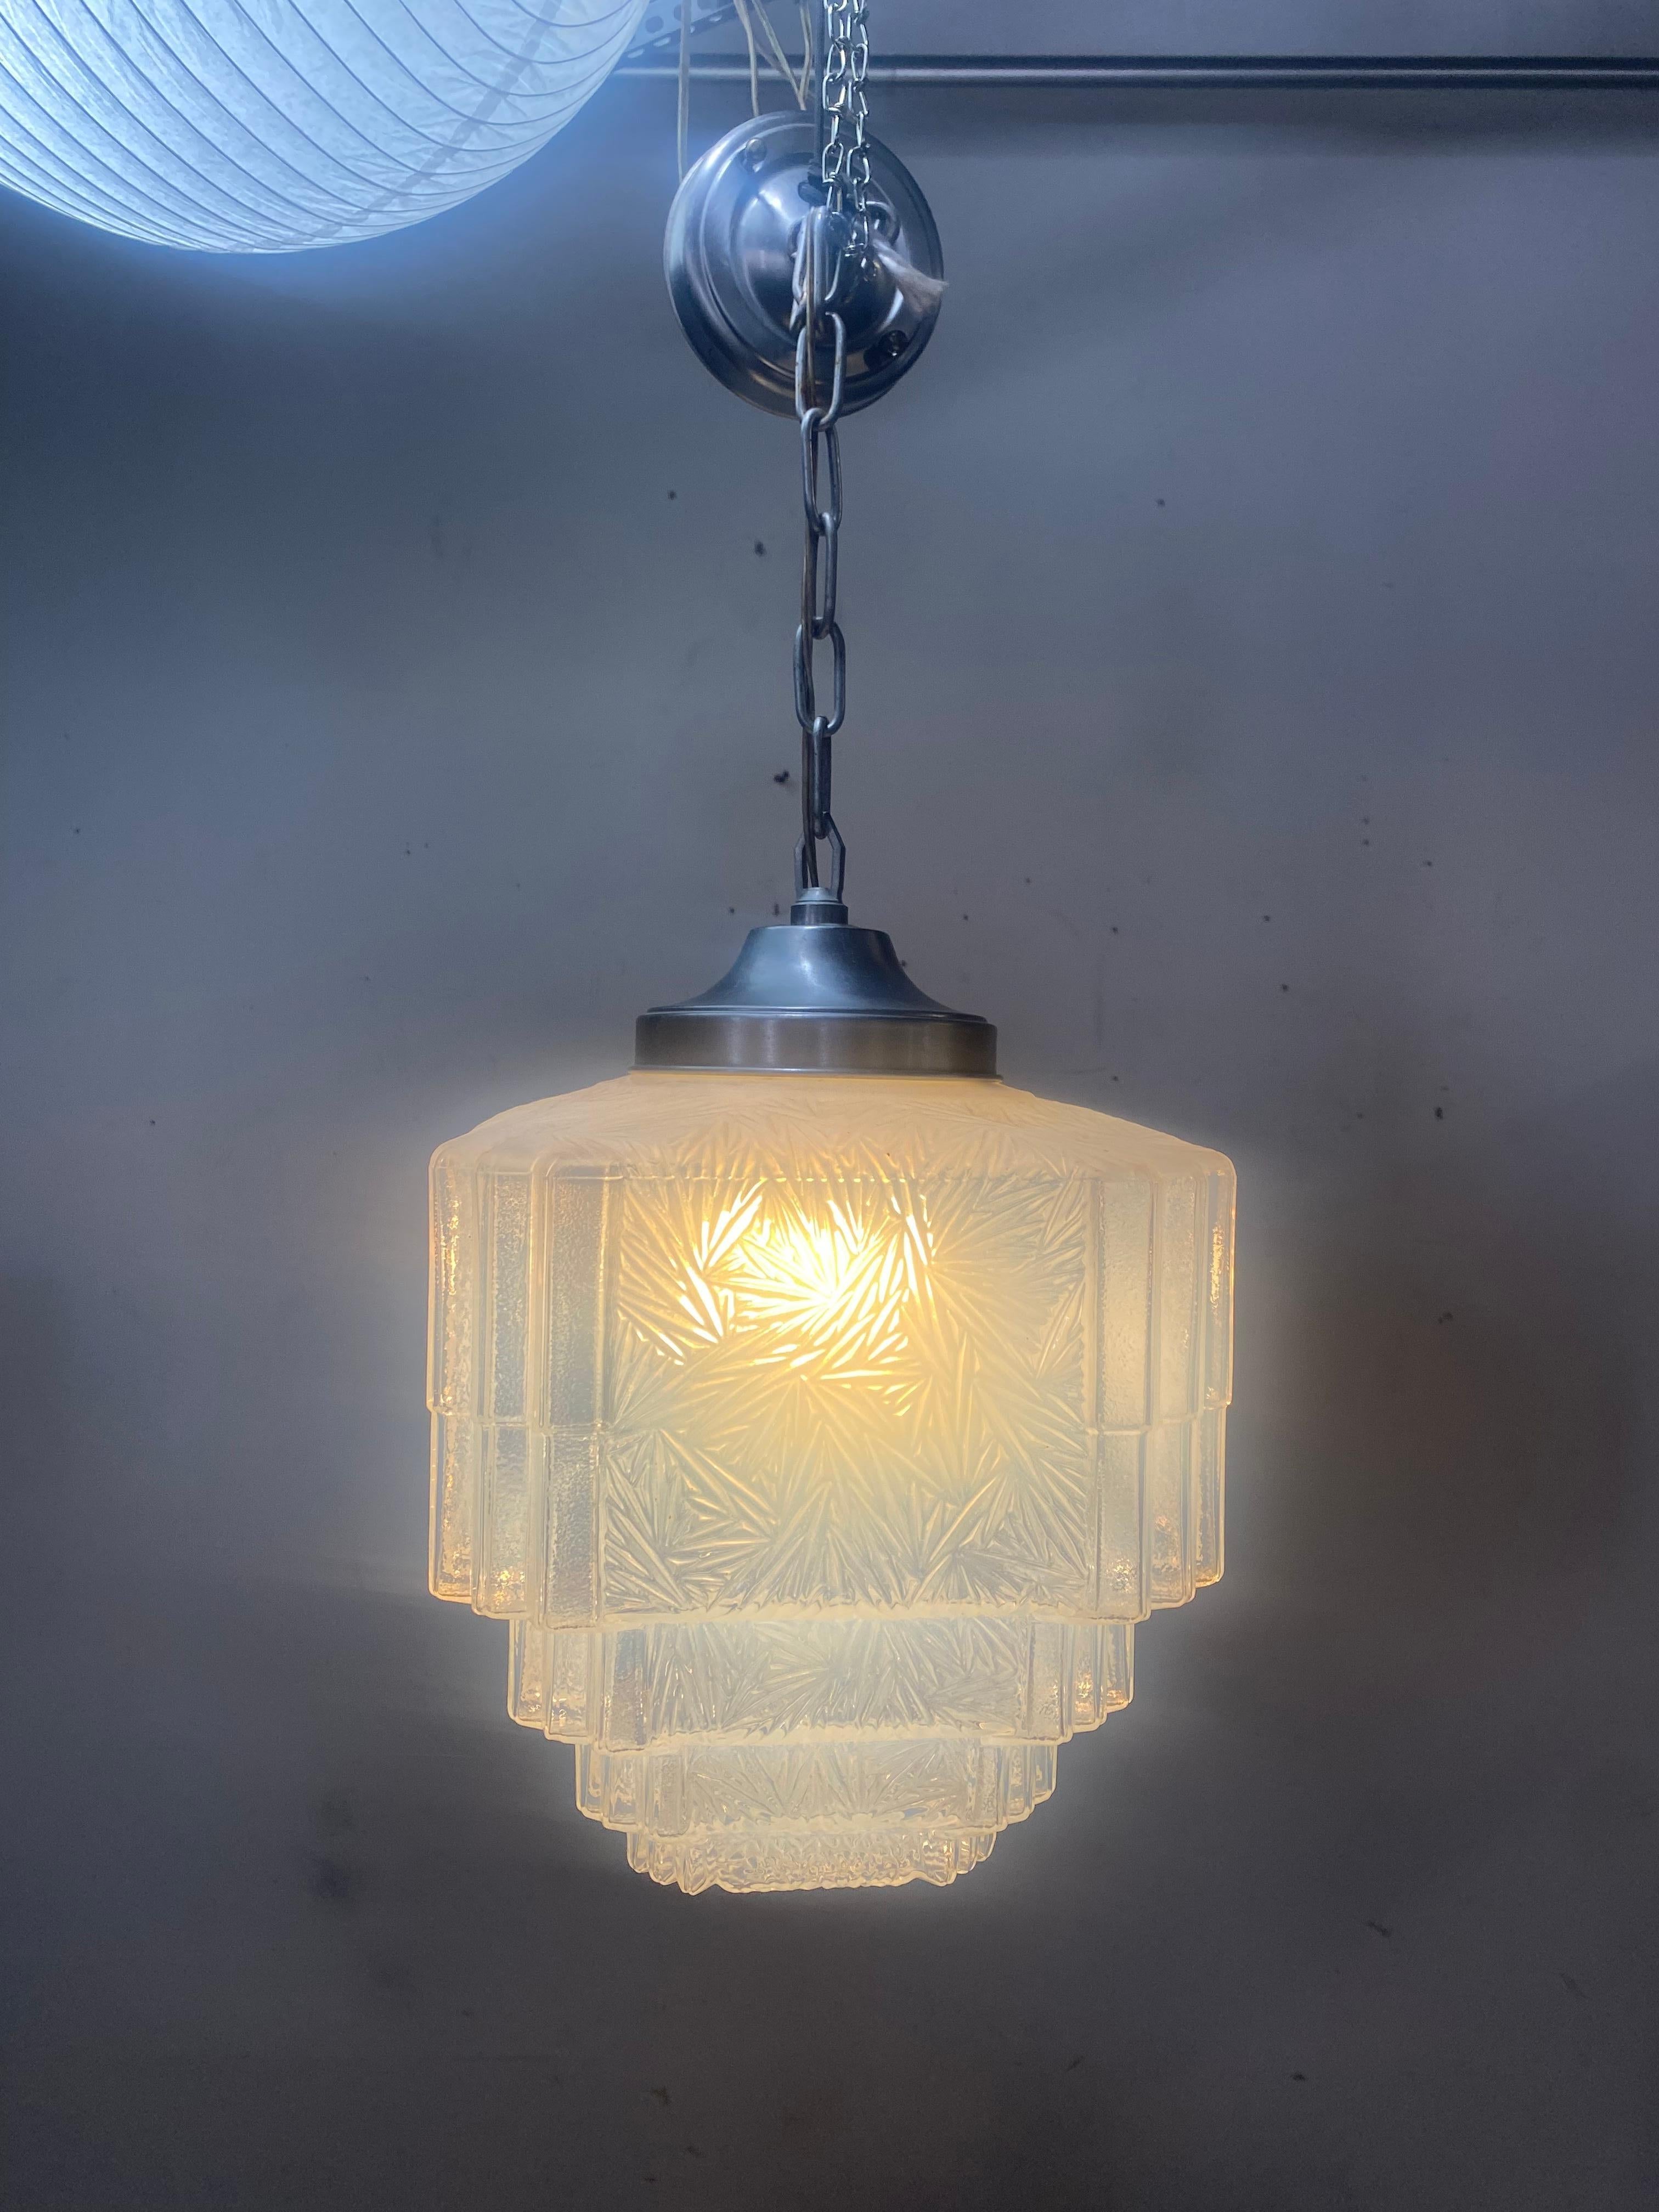 Art Deco pendant light features a layer cake, ribbed pattern opaline glass shade on a chrome chain with canopy. The shade measures 12 diameter x 13 height.